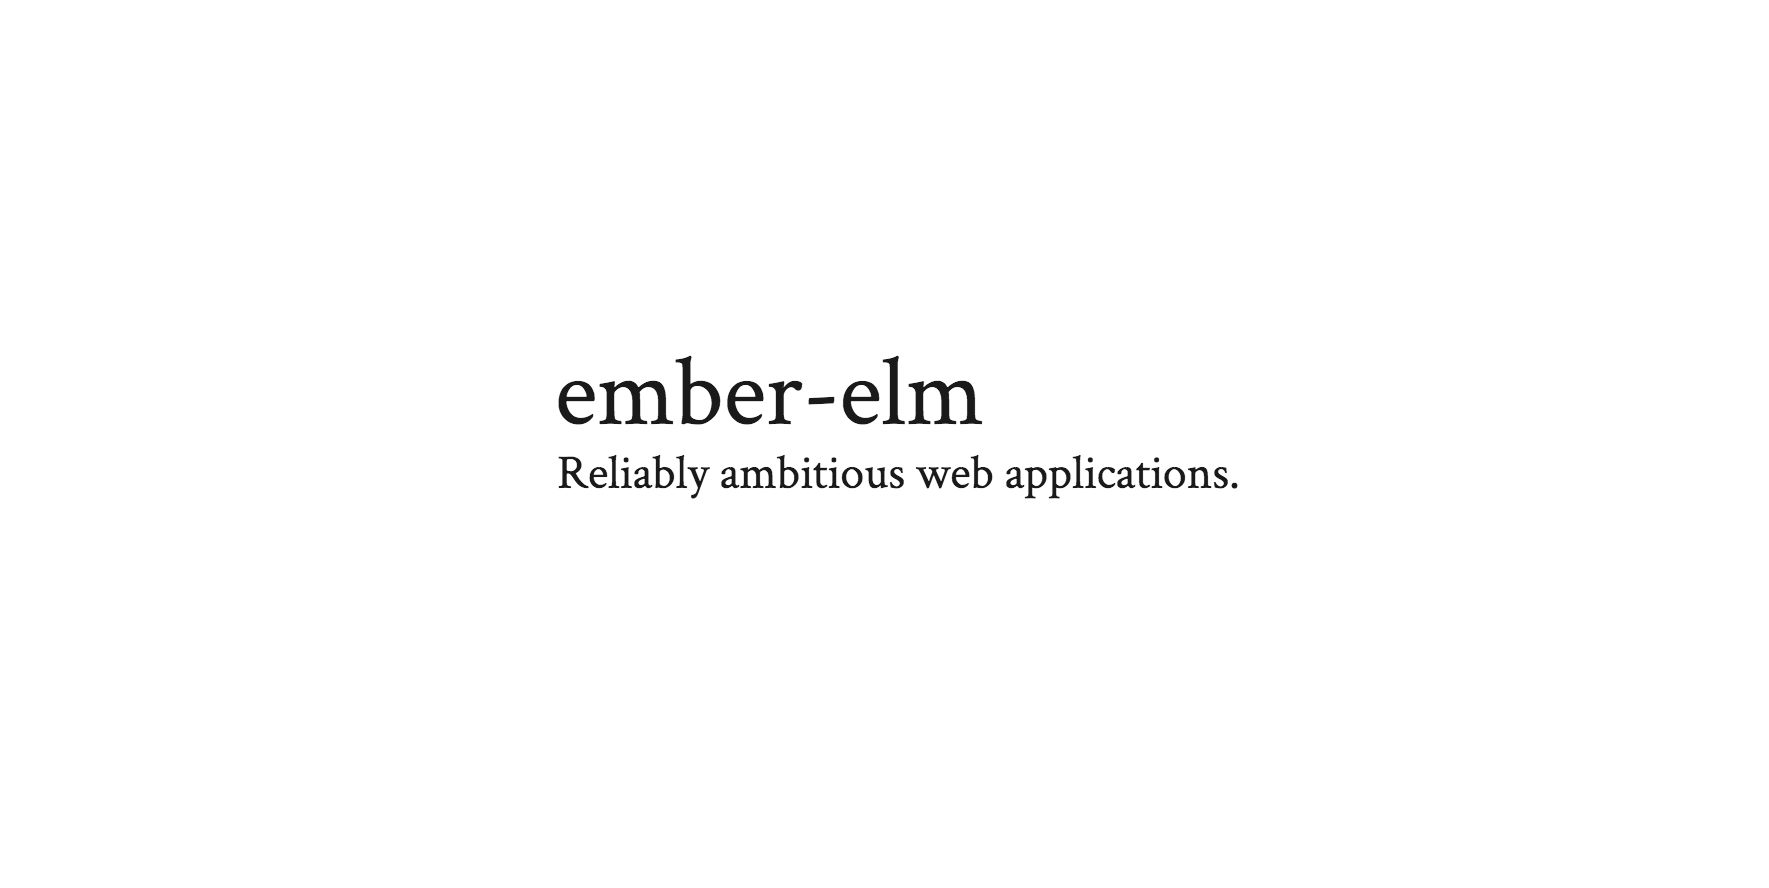 ember-elm: Reliably ambitious web applications.